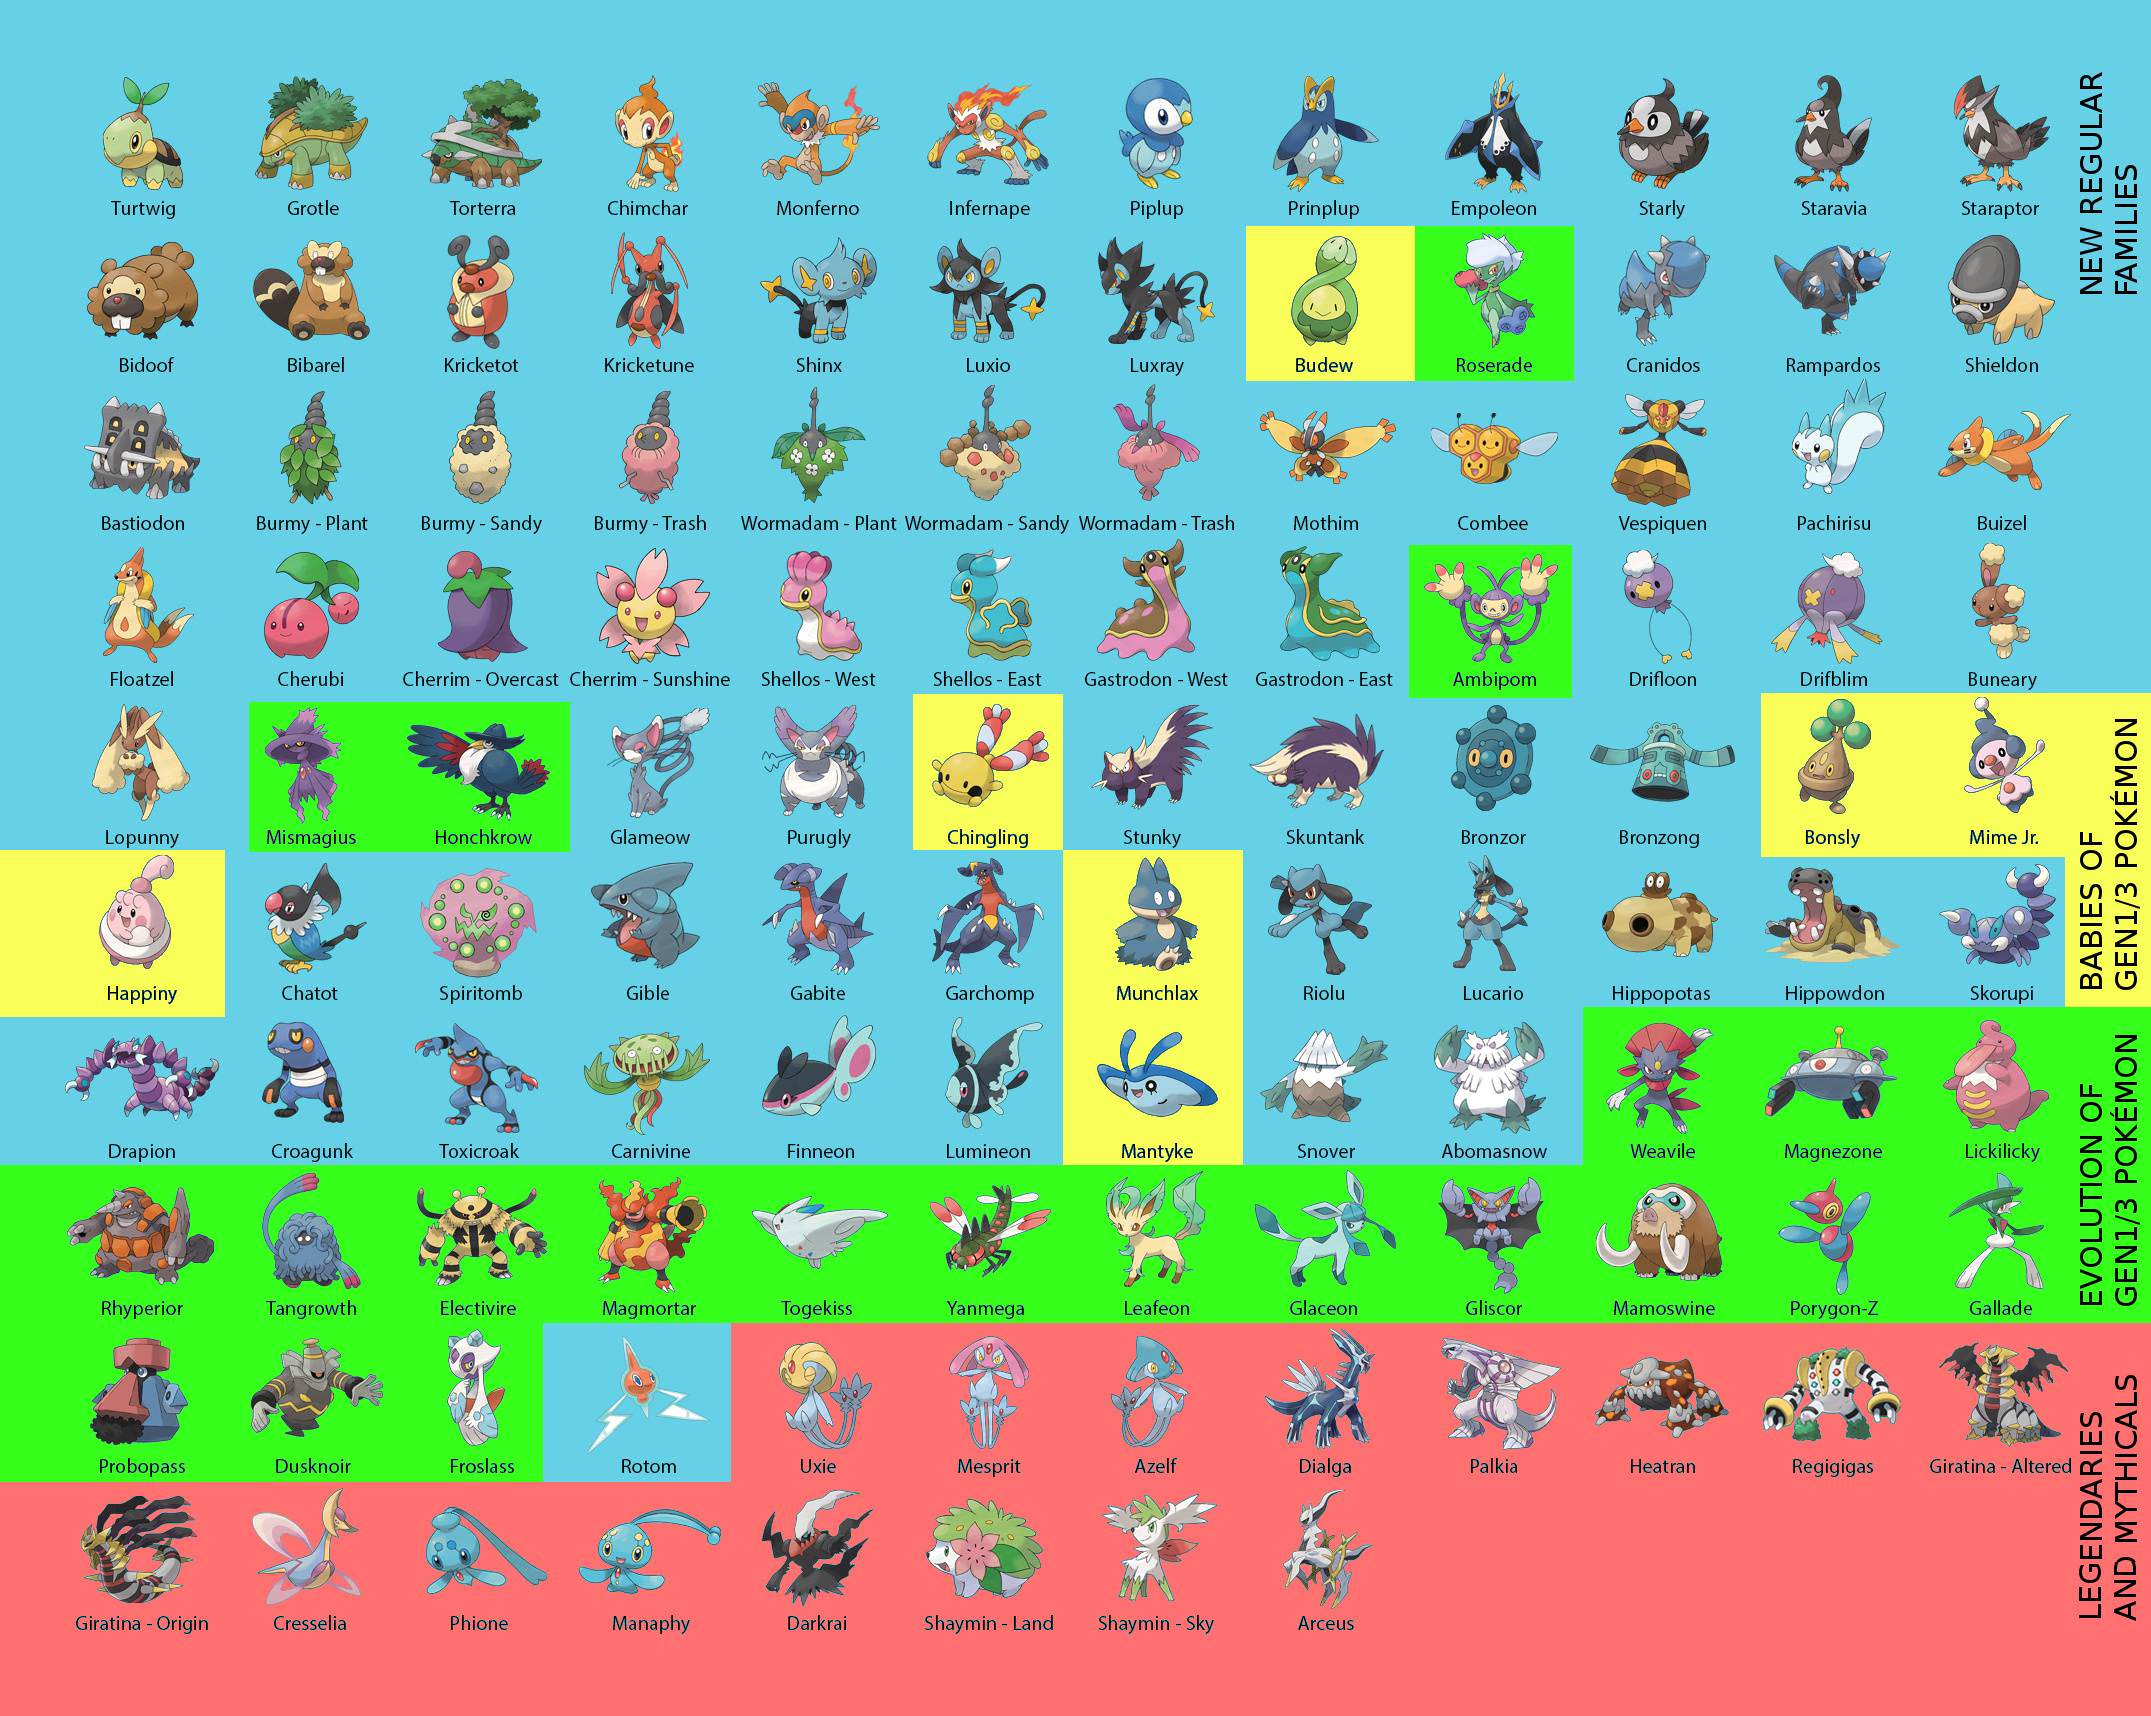 Pokémon Go Gen 4 Pokémon list released so far and every creature from Diamond and Pearls region listed